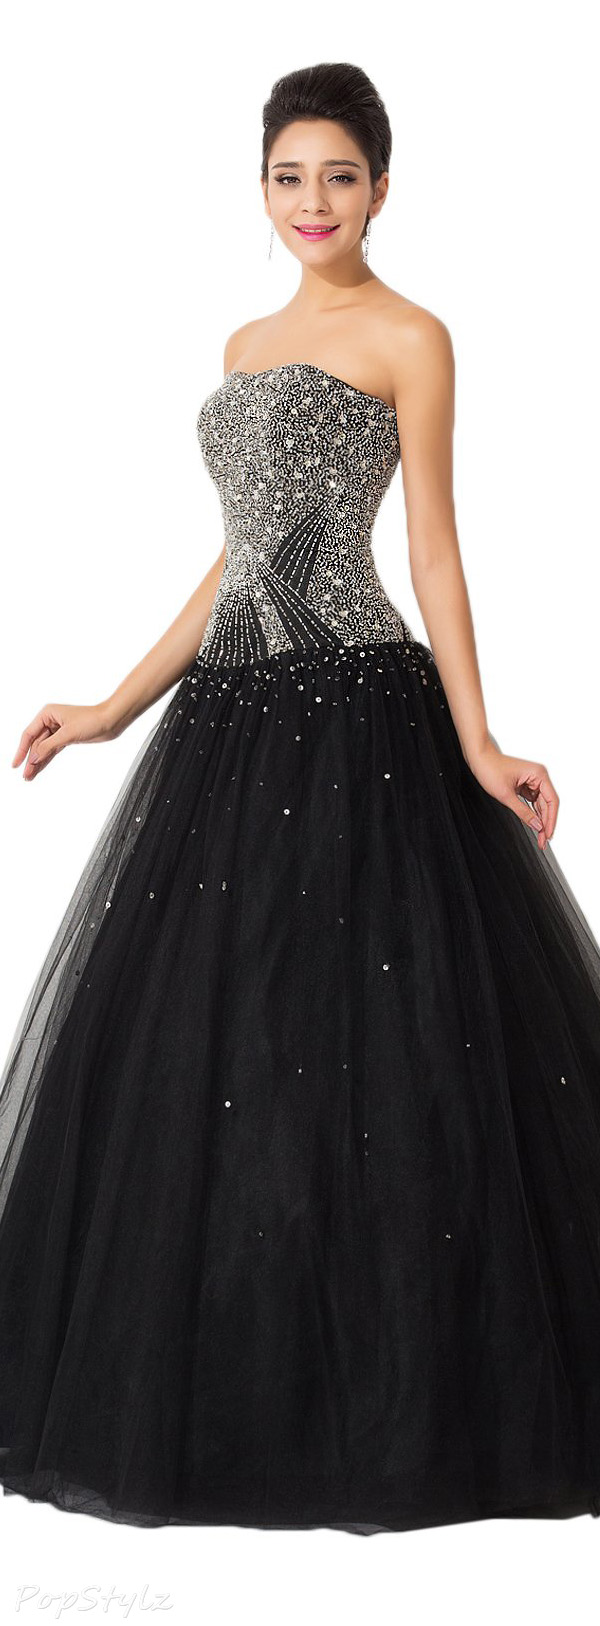 Sunvary Tulle & Beads Formal Evening Gown